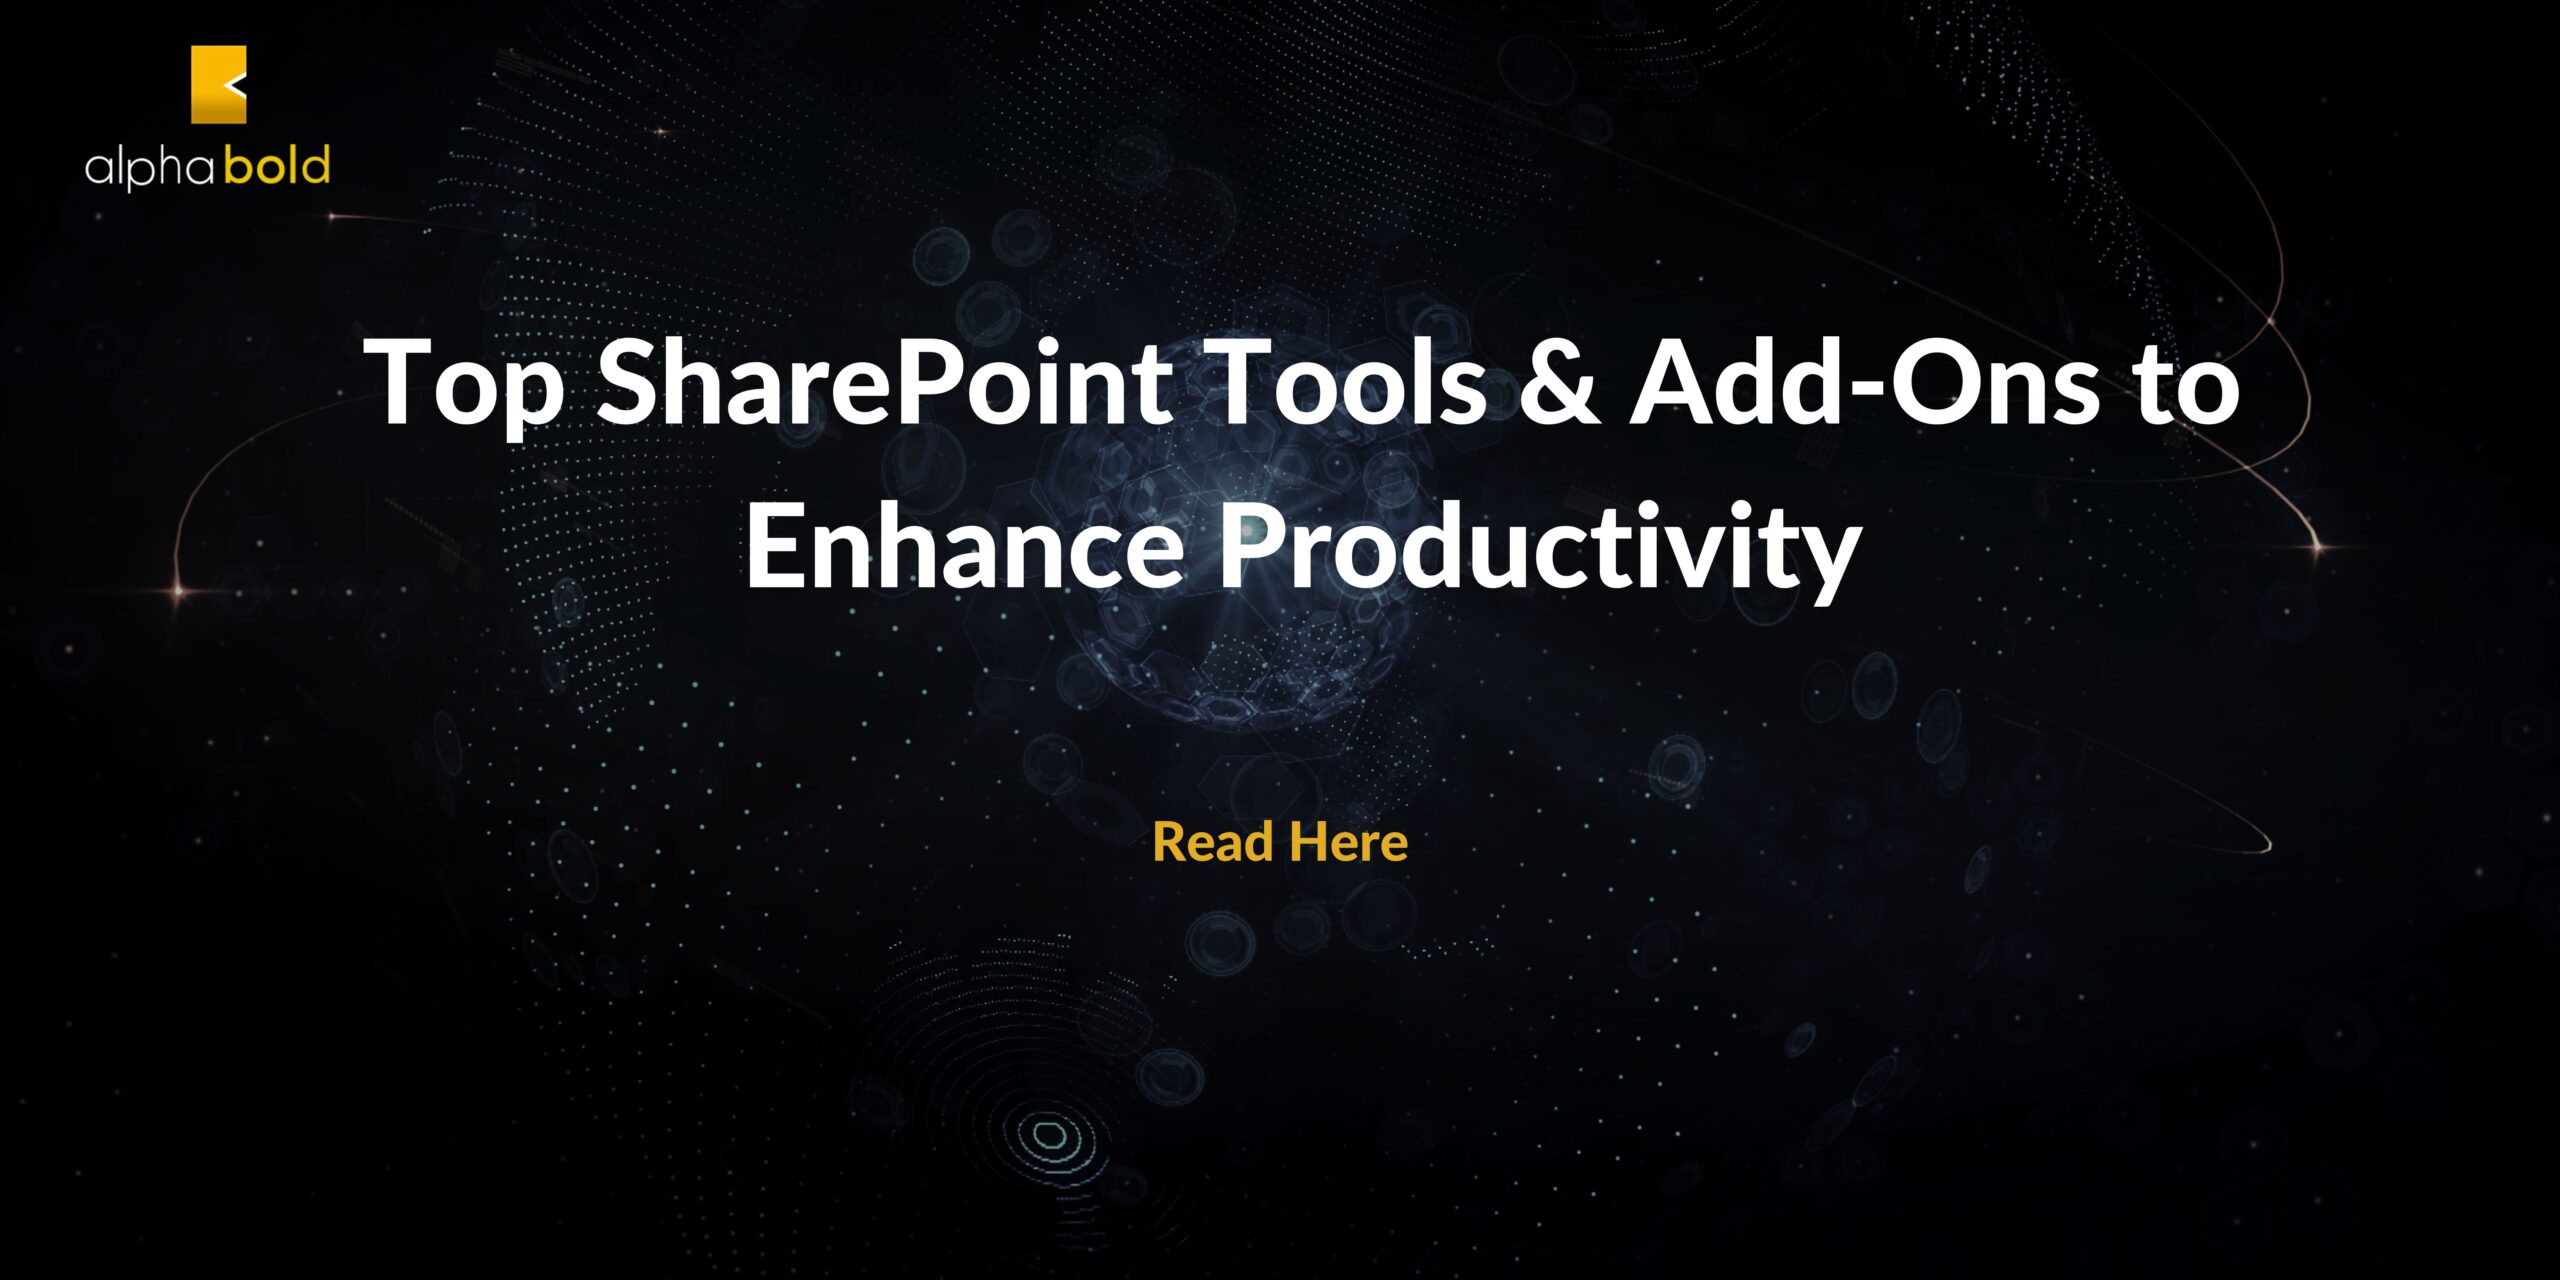 Top SharePoint Tools & Add-Ons to Enhance Productivity